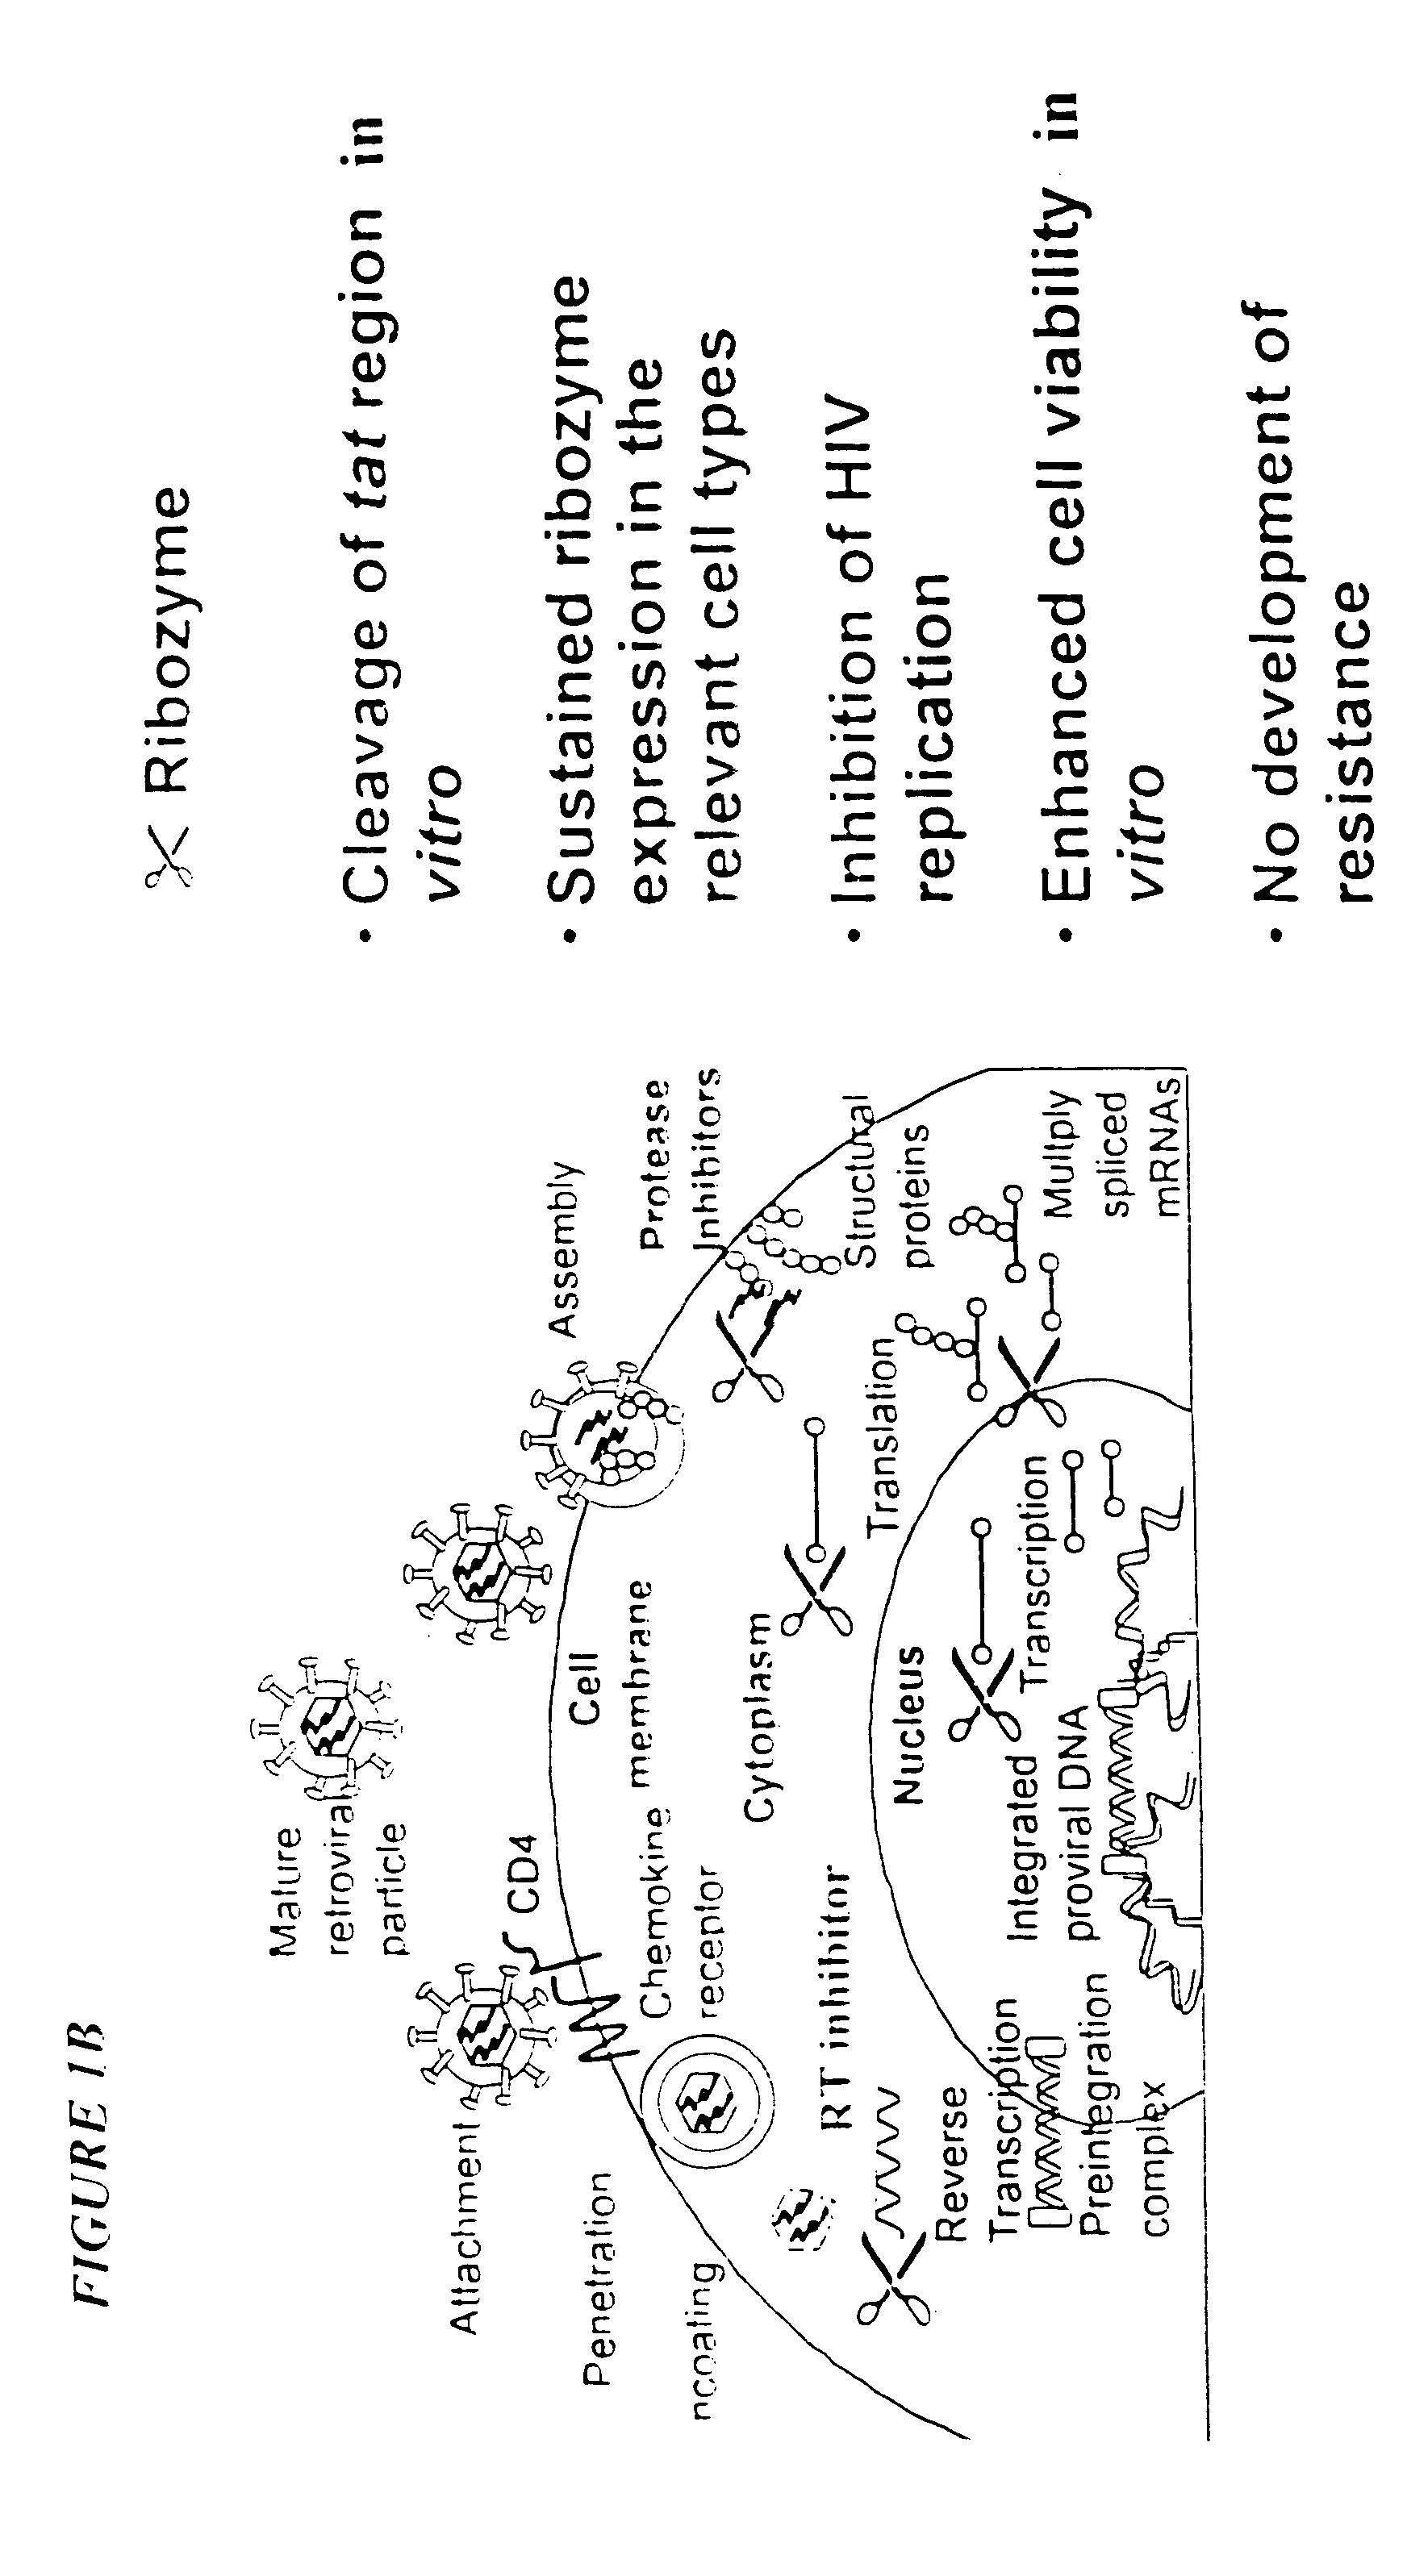 Process for the preparation of a composition of genetically modified hematopoietic progenitor cells